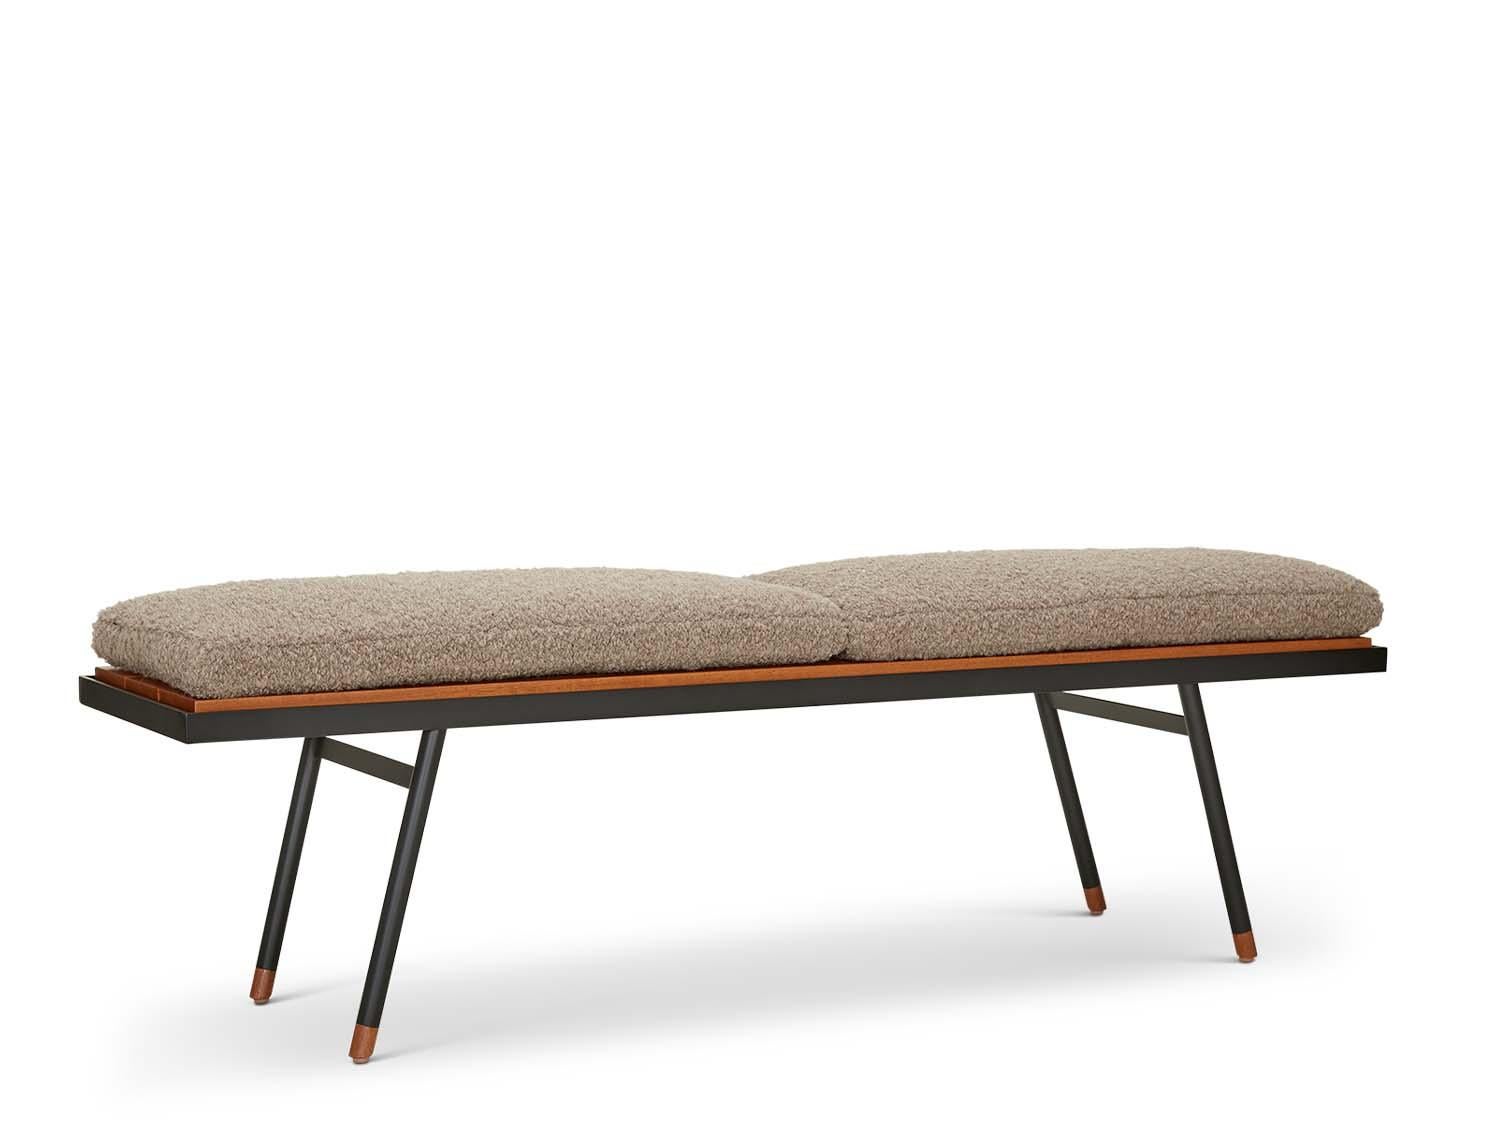 The Montrose bench has a steel frame and two loose cushions. Can be used indoors or outdoors, please specify when ordering.

 The Lawson-Fenning Collection is designed and handmade in Los Angeles, California. Reach out to discover what options are